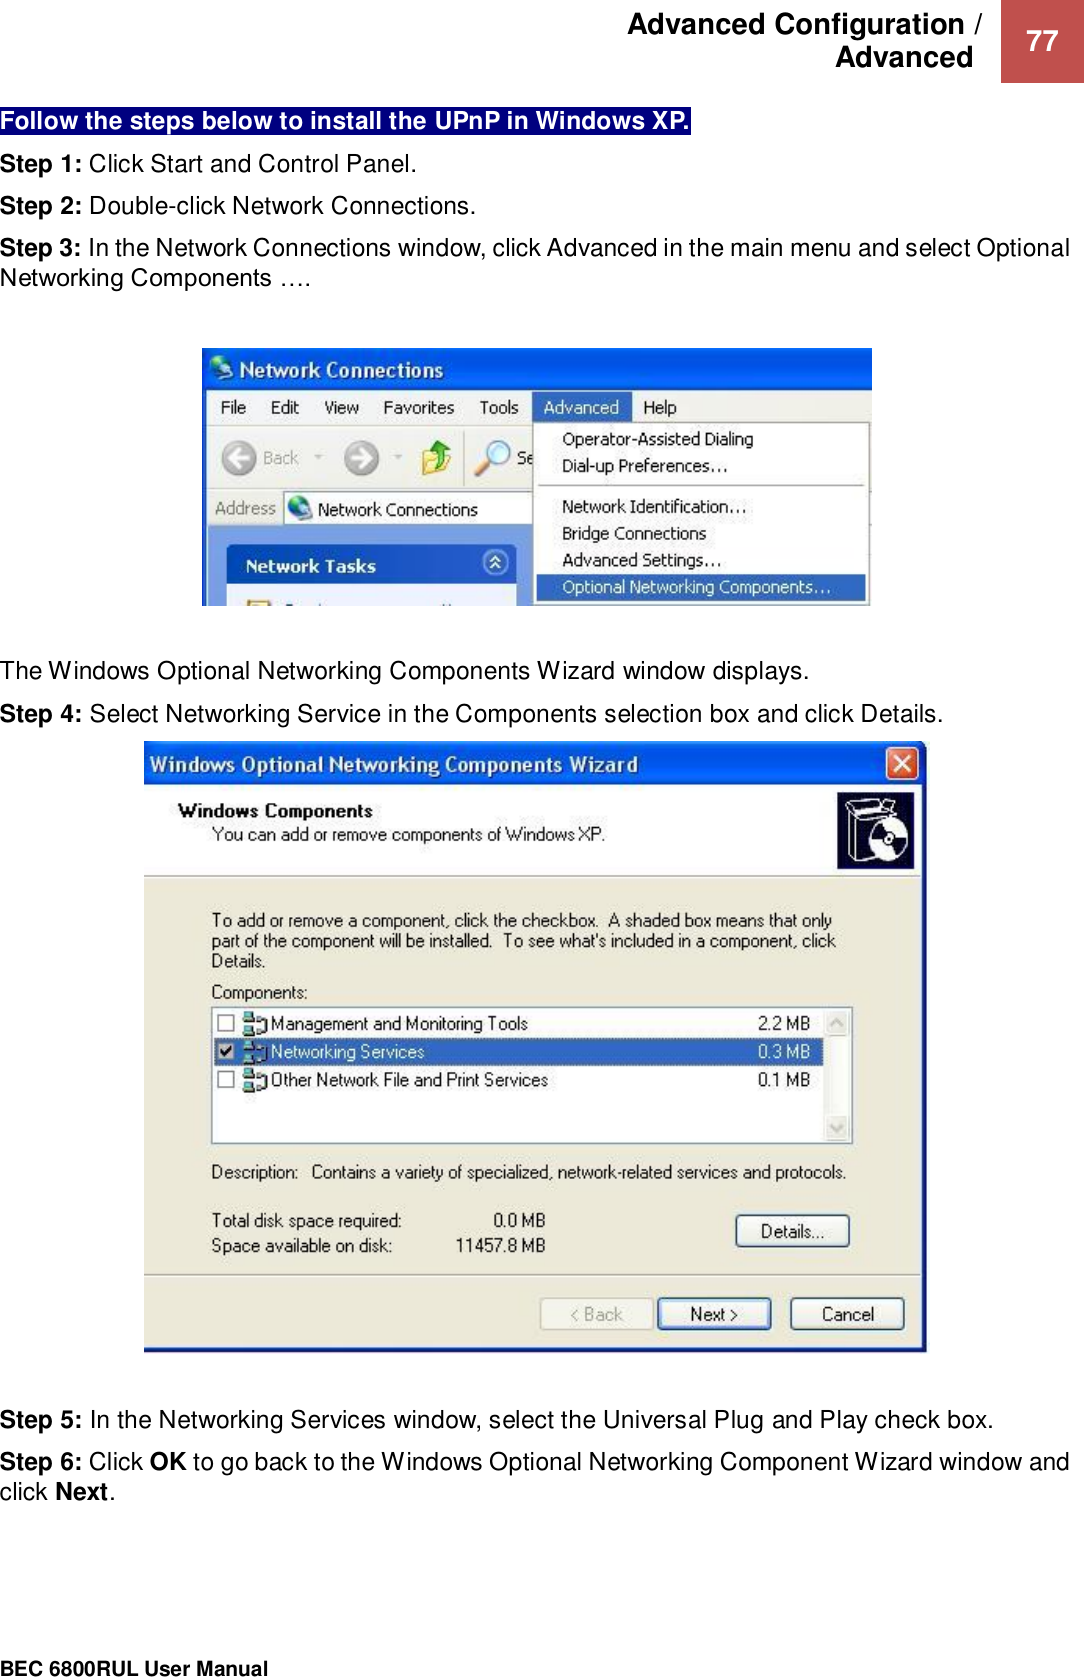 Advanced Configuration /  Advanced   77                                                 BEC 6800RUL User Manual  Follow the steps below to install the UPnP in Windows XP. Step 1: Click Start and Control Panel. Step 2: Double-click Network Connections. Step 3: In the Network Connections window, click Advanced in the main menu and select Optional Networking Components ….     The Windows Optional Networking Components Wizard window displays. Step 4: Select Networking Service in the Components selection box and click Details.    Step 5: In the Networking Services window, select the Universal Plug and Play check box. Step 6: Click OK to go back to the Windows Optional Networking Component Wizard window and click Next.   